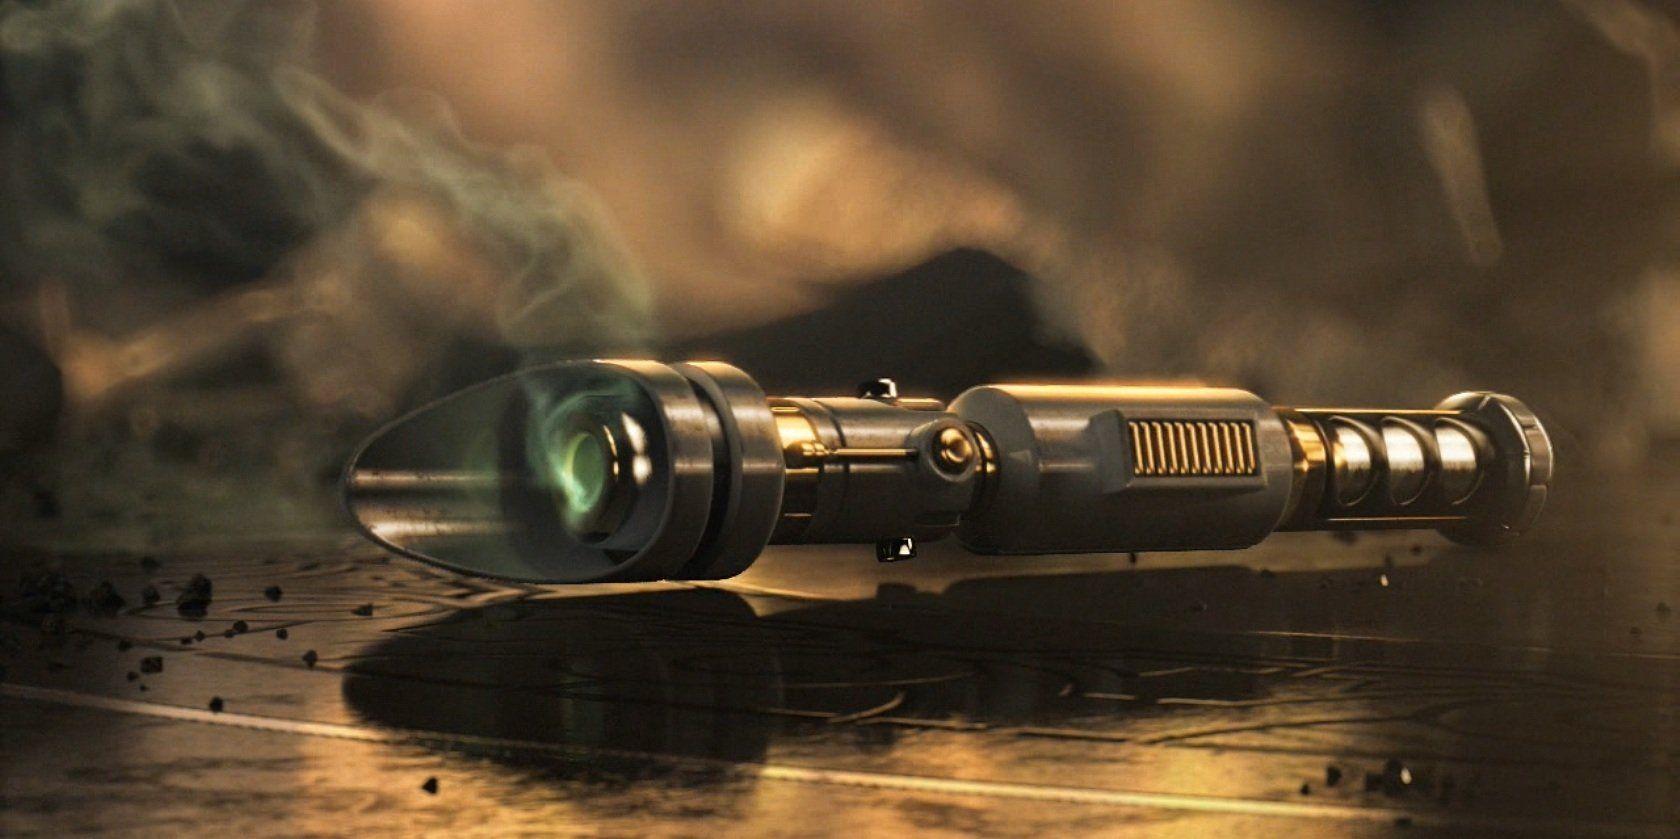 Lightsaber HD Wallpaper and Background Image